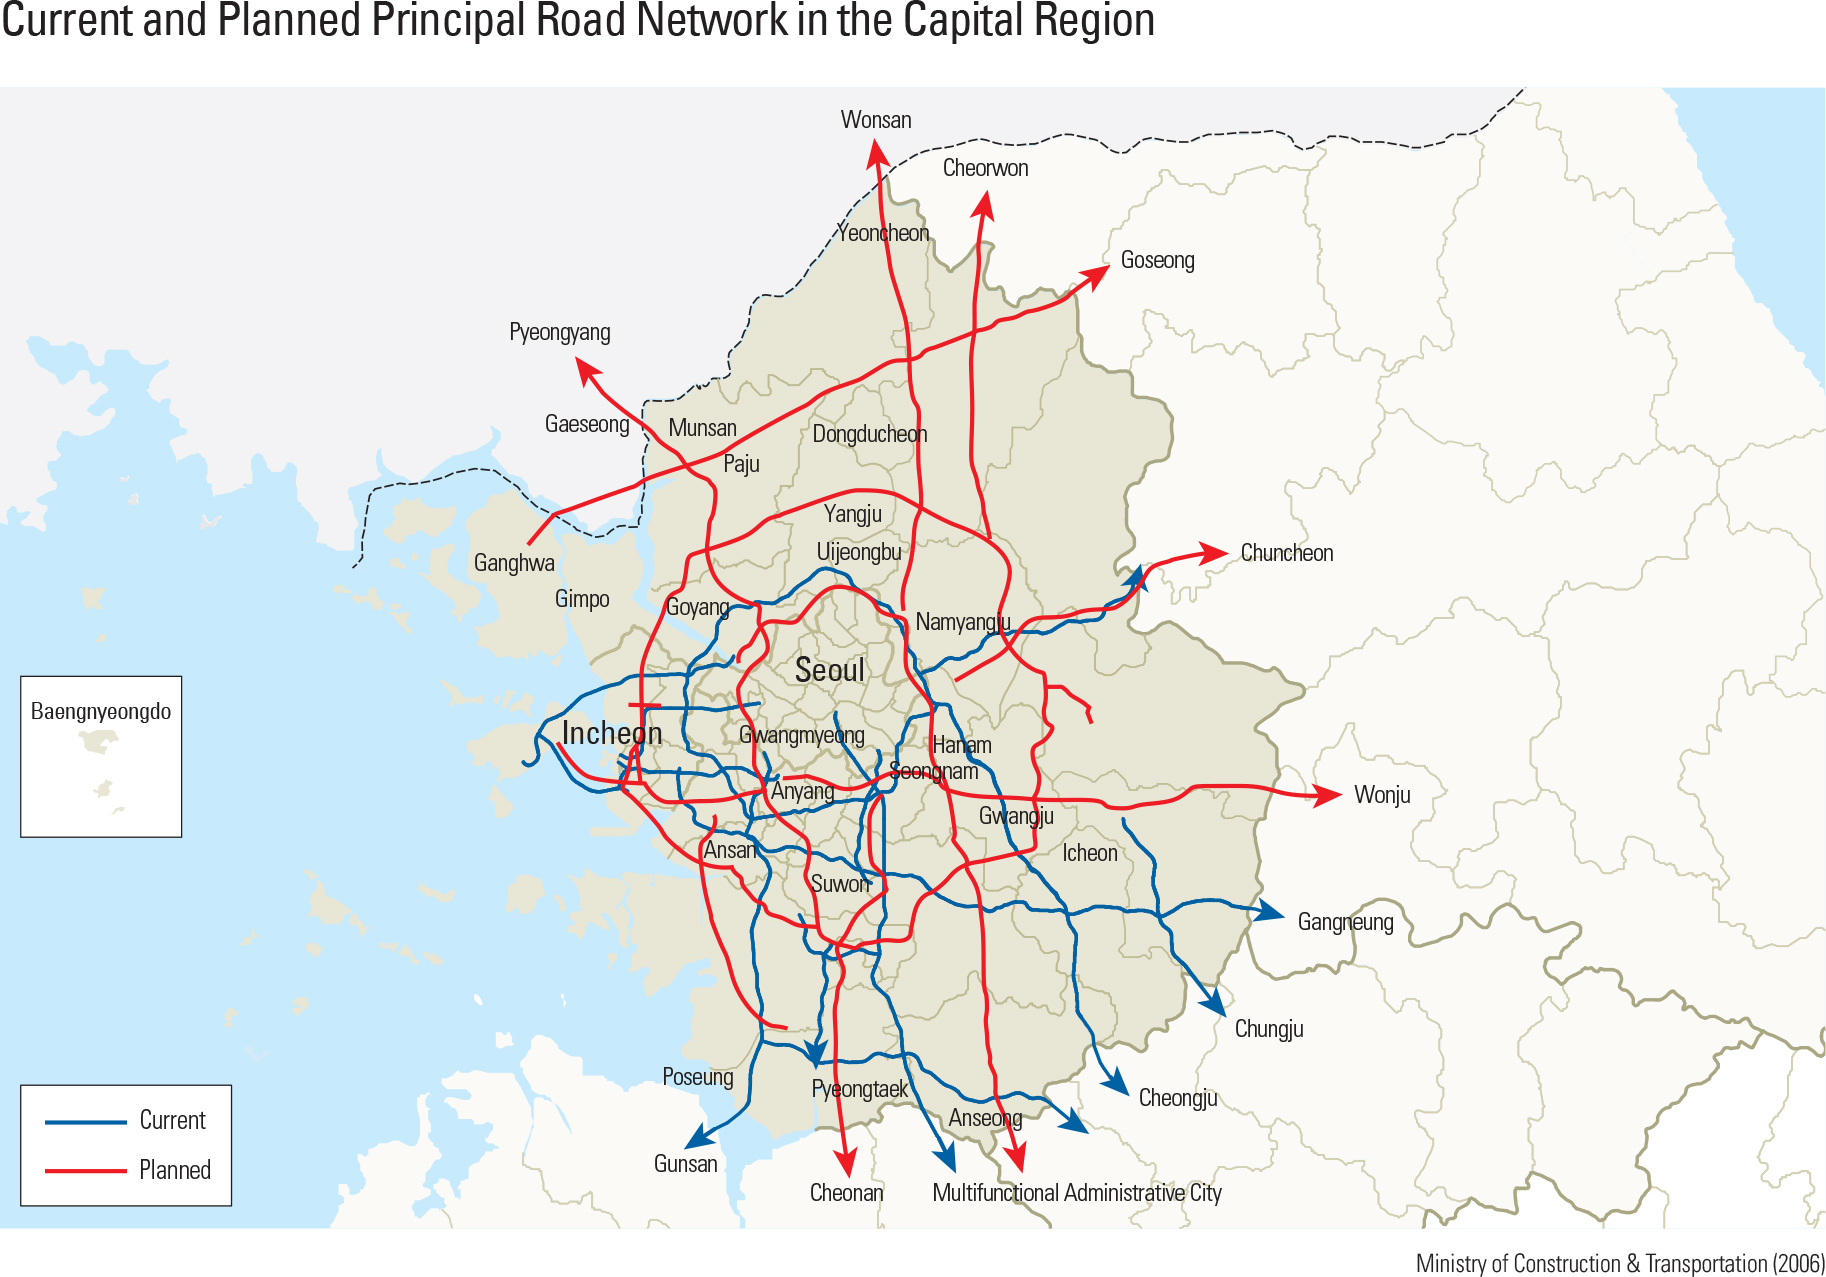  Current and Planned Principal Road Network in the Capital Region